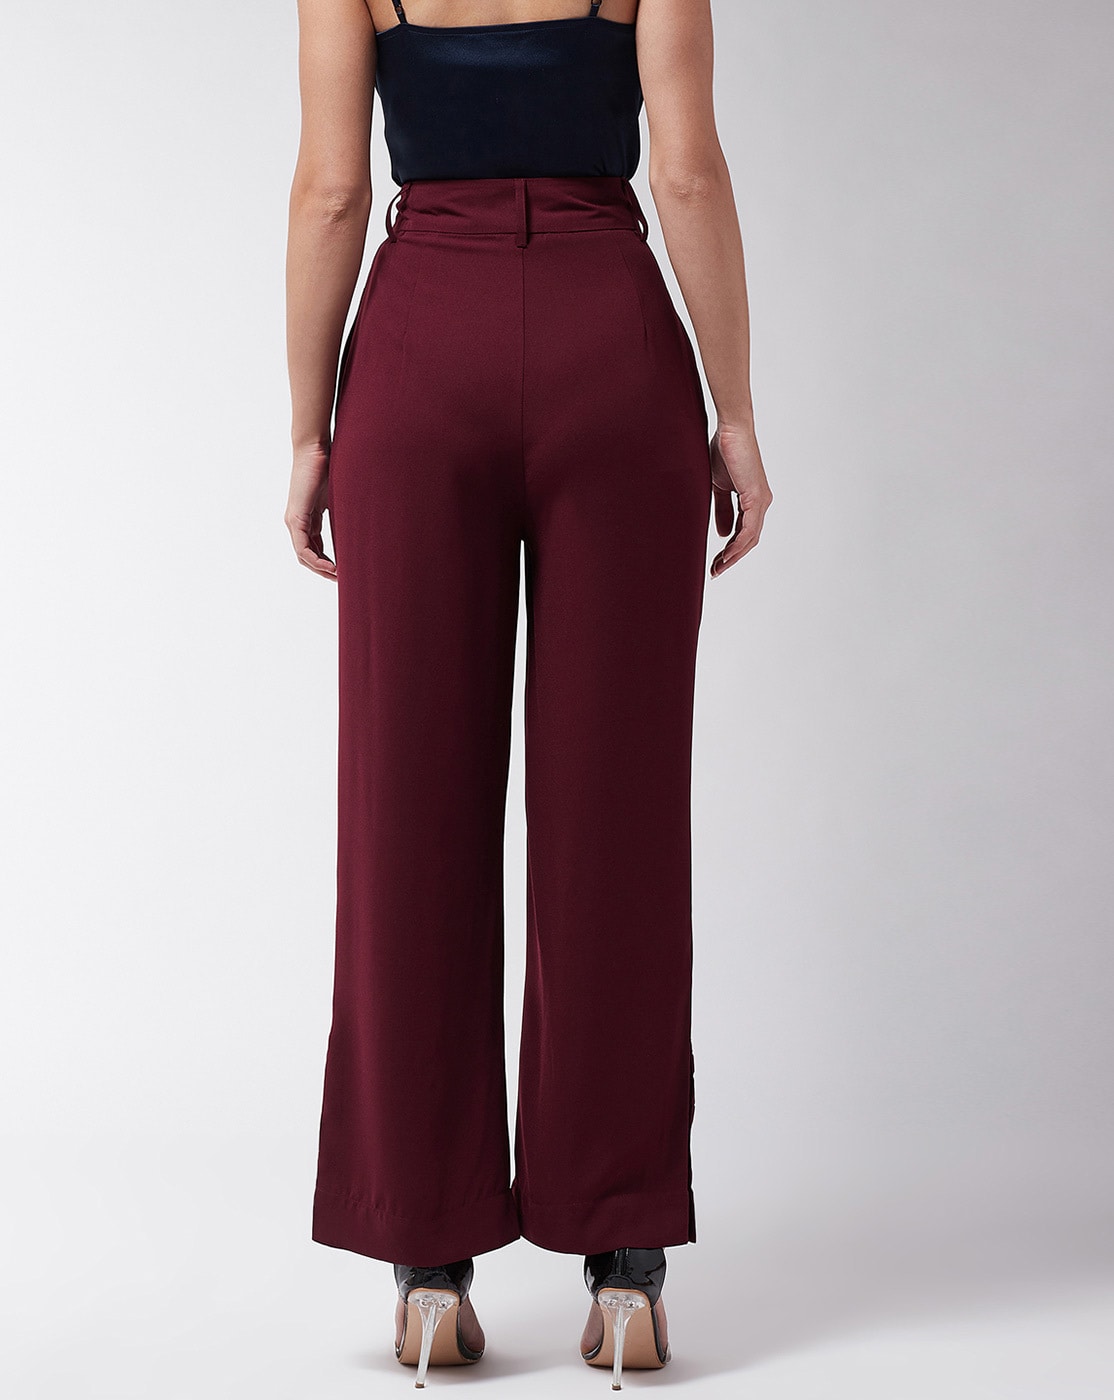 Marie Claire Bottoms Pants and Trousers  Buy Marie Claire Women Casual  Maroon Colour Solid Regular High Waist Trousers Online  Nykaa Fashion